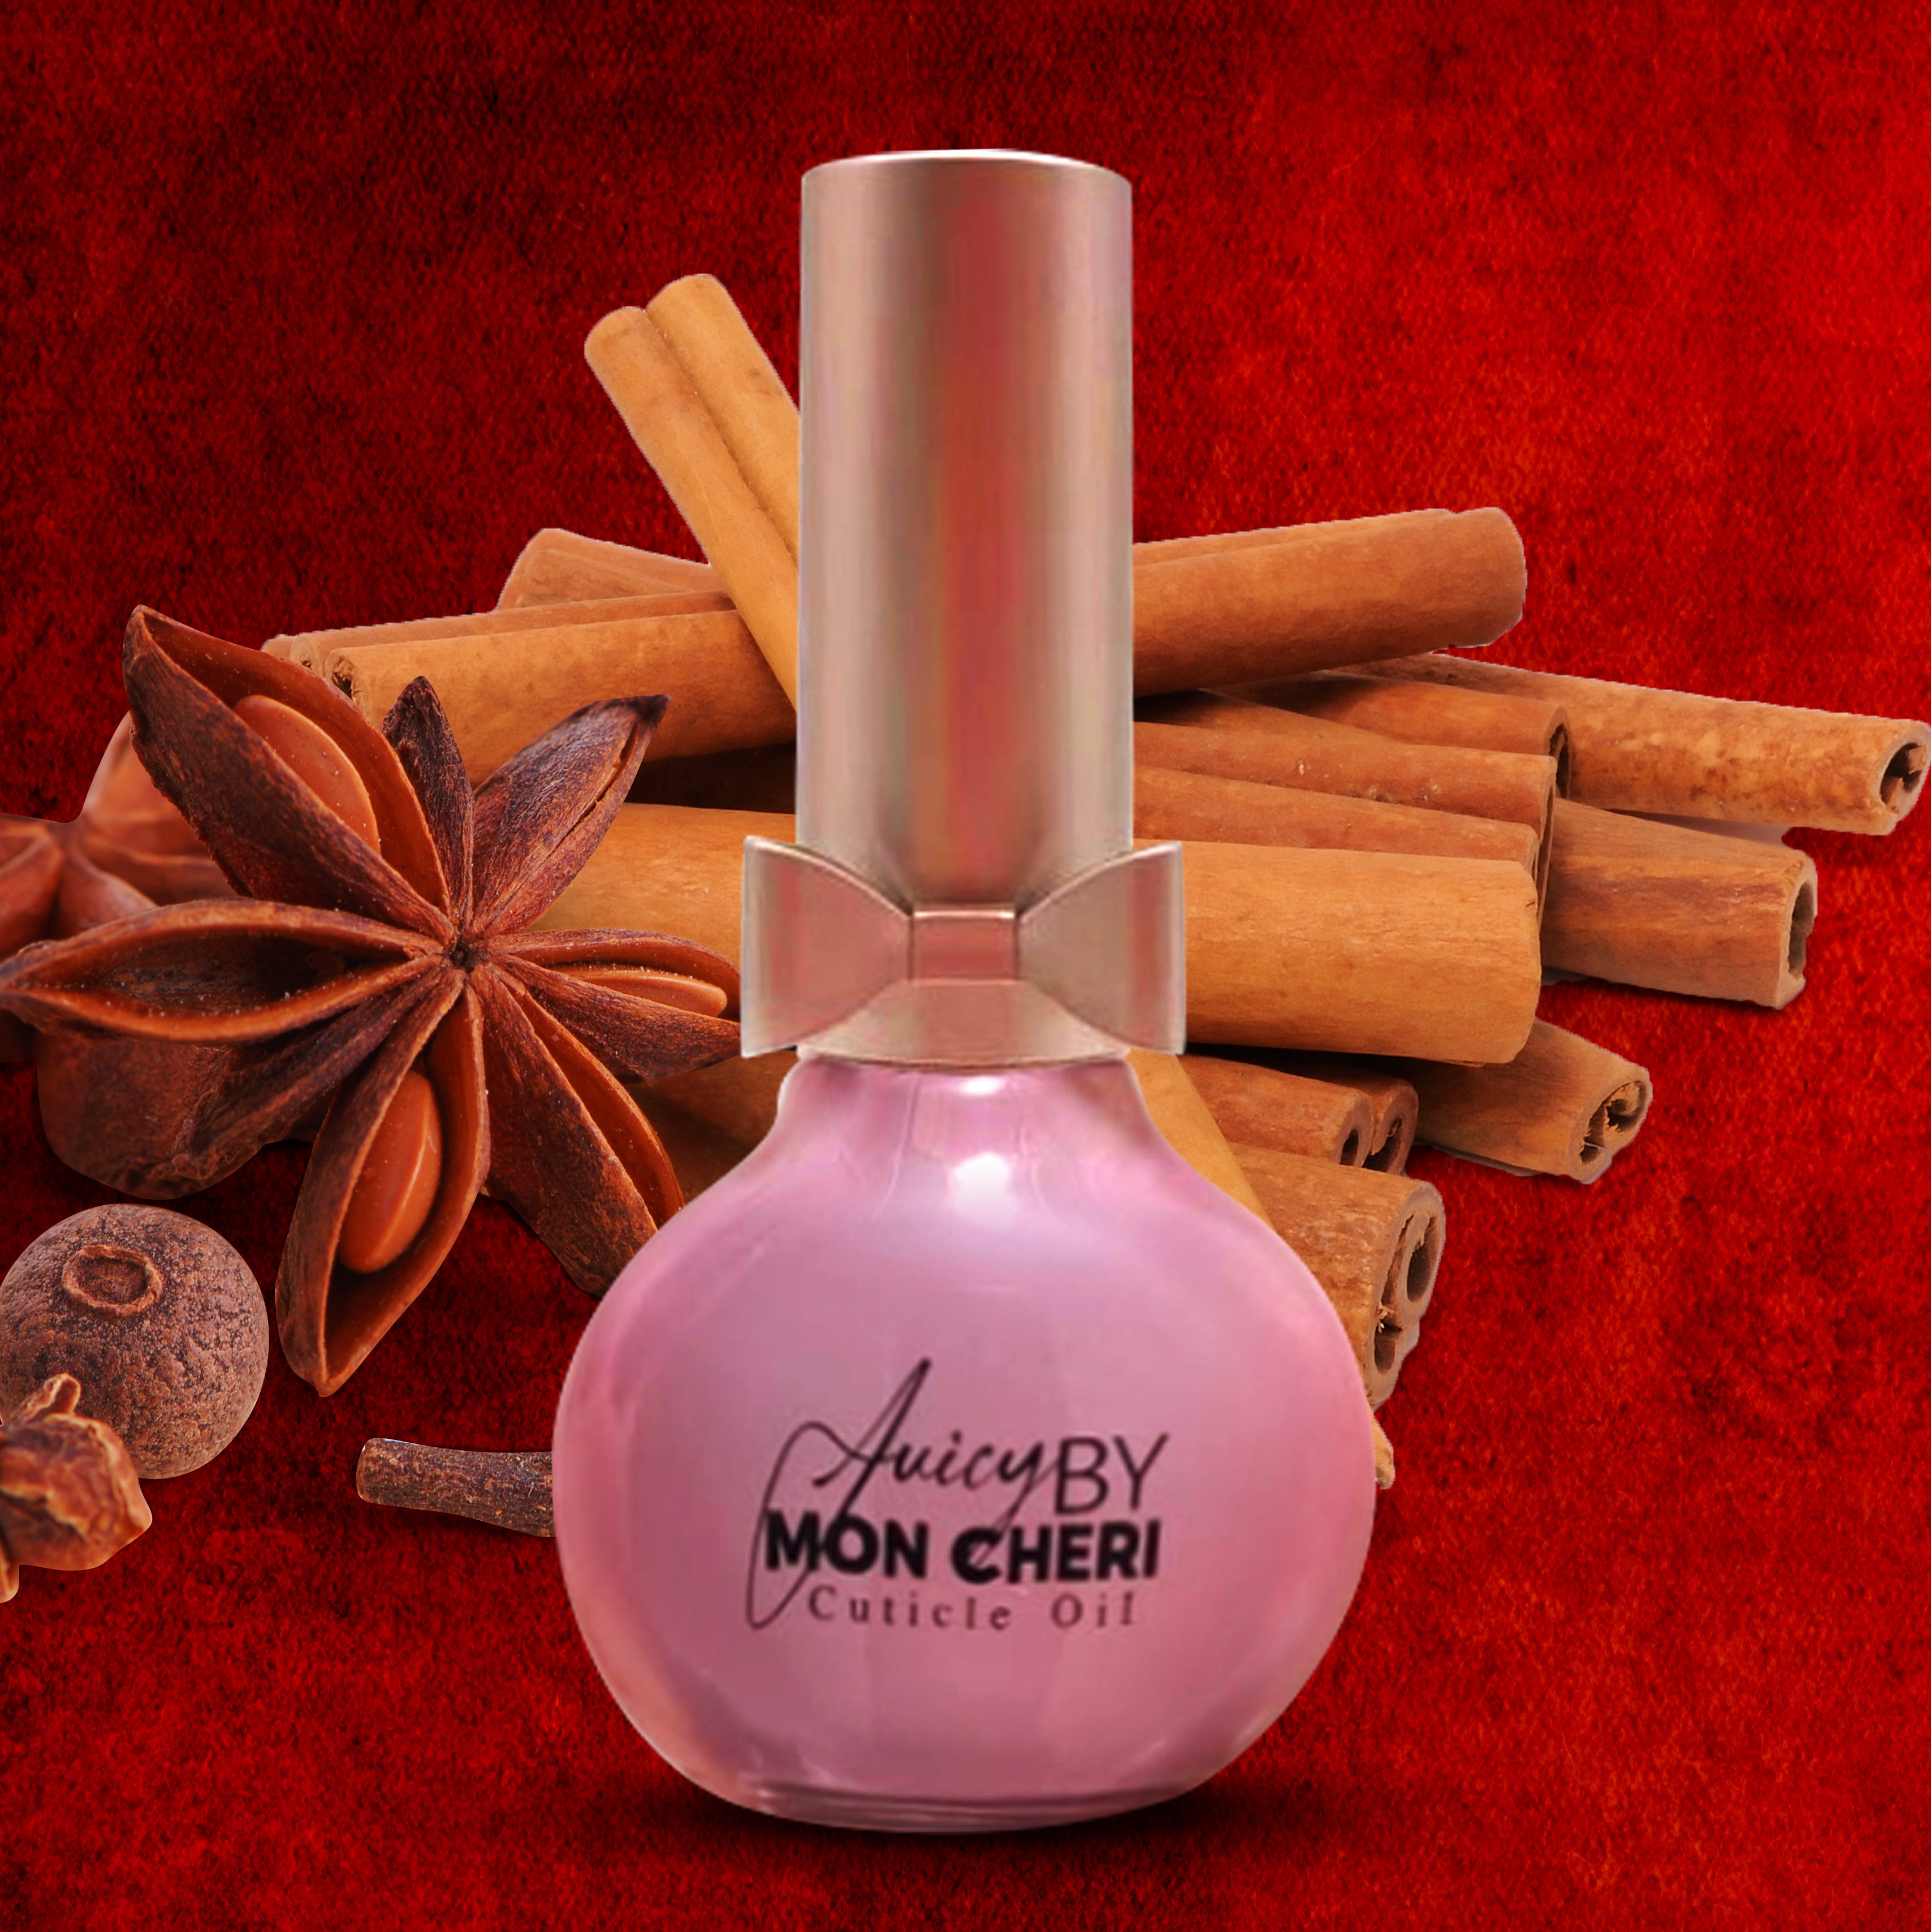 Cinnamon-Scented Red Hot Juicy by Mon Cheri Cuticle Oil